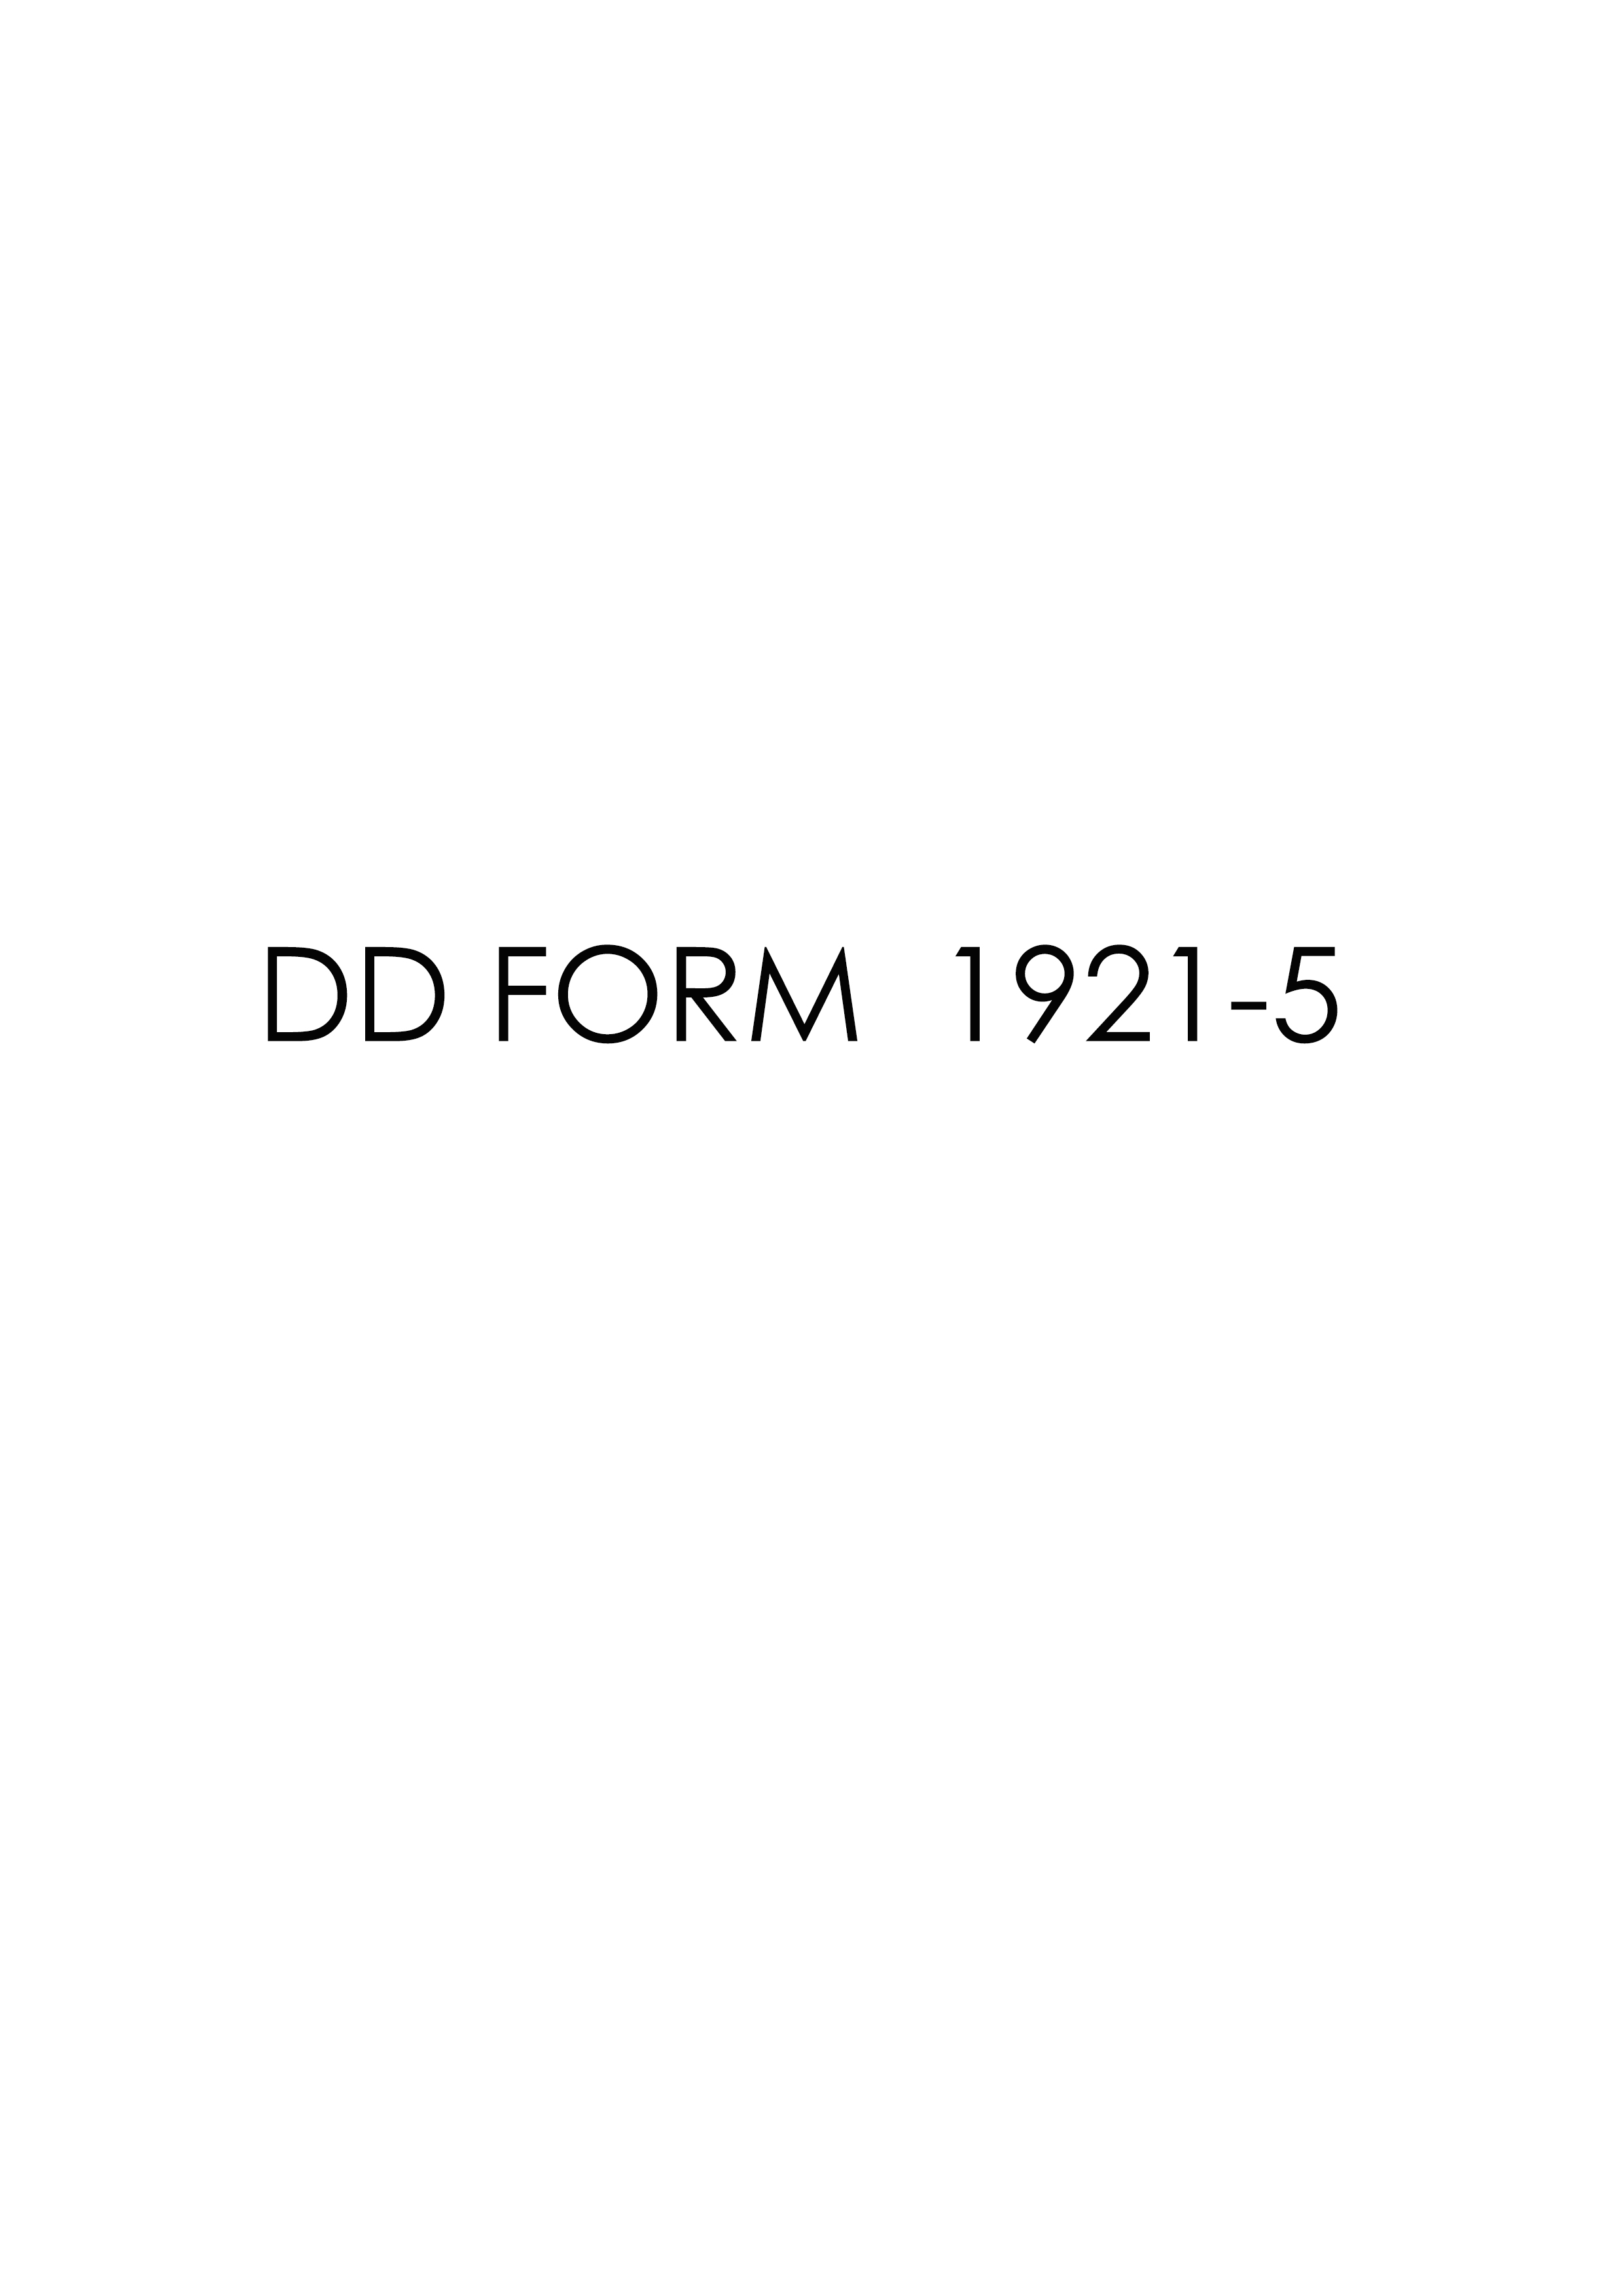 Download Fillable dd Form 1921-5